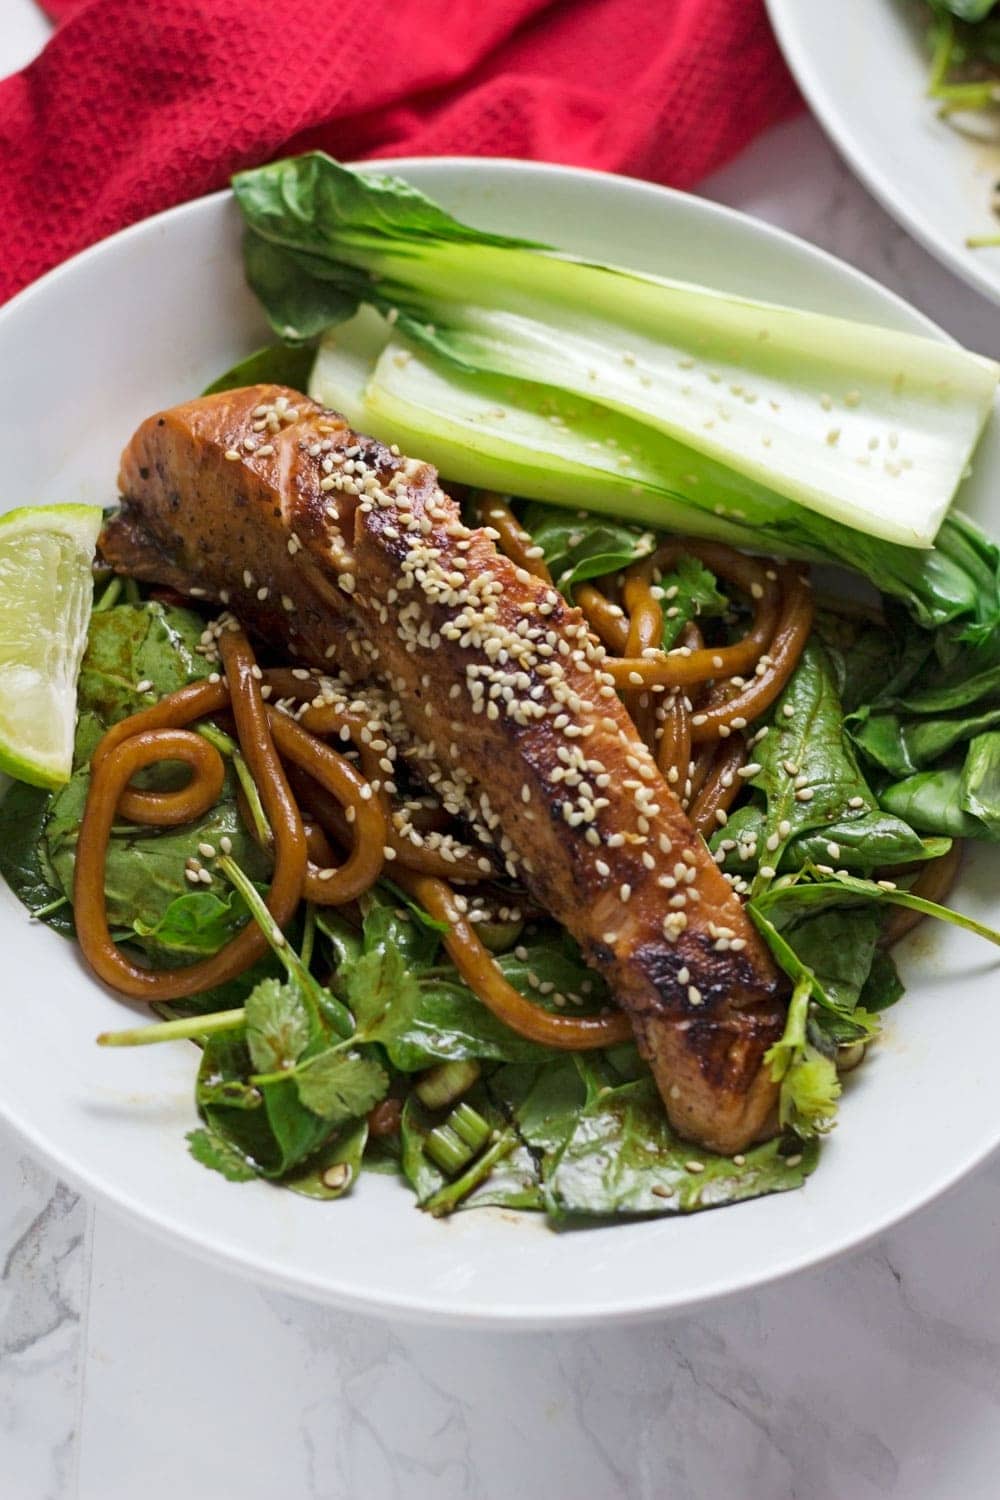 This fresh and healthy teriyaki salmon with udon noodles is a delicious summer dinner with a spicy kick. Serve with spinach and pak choi.